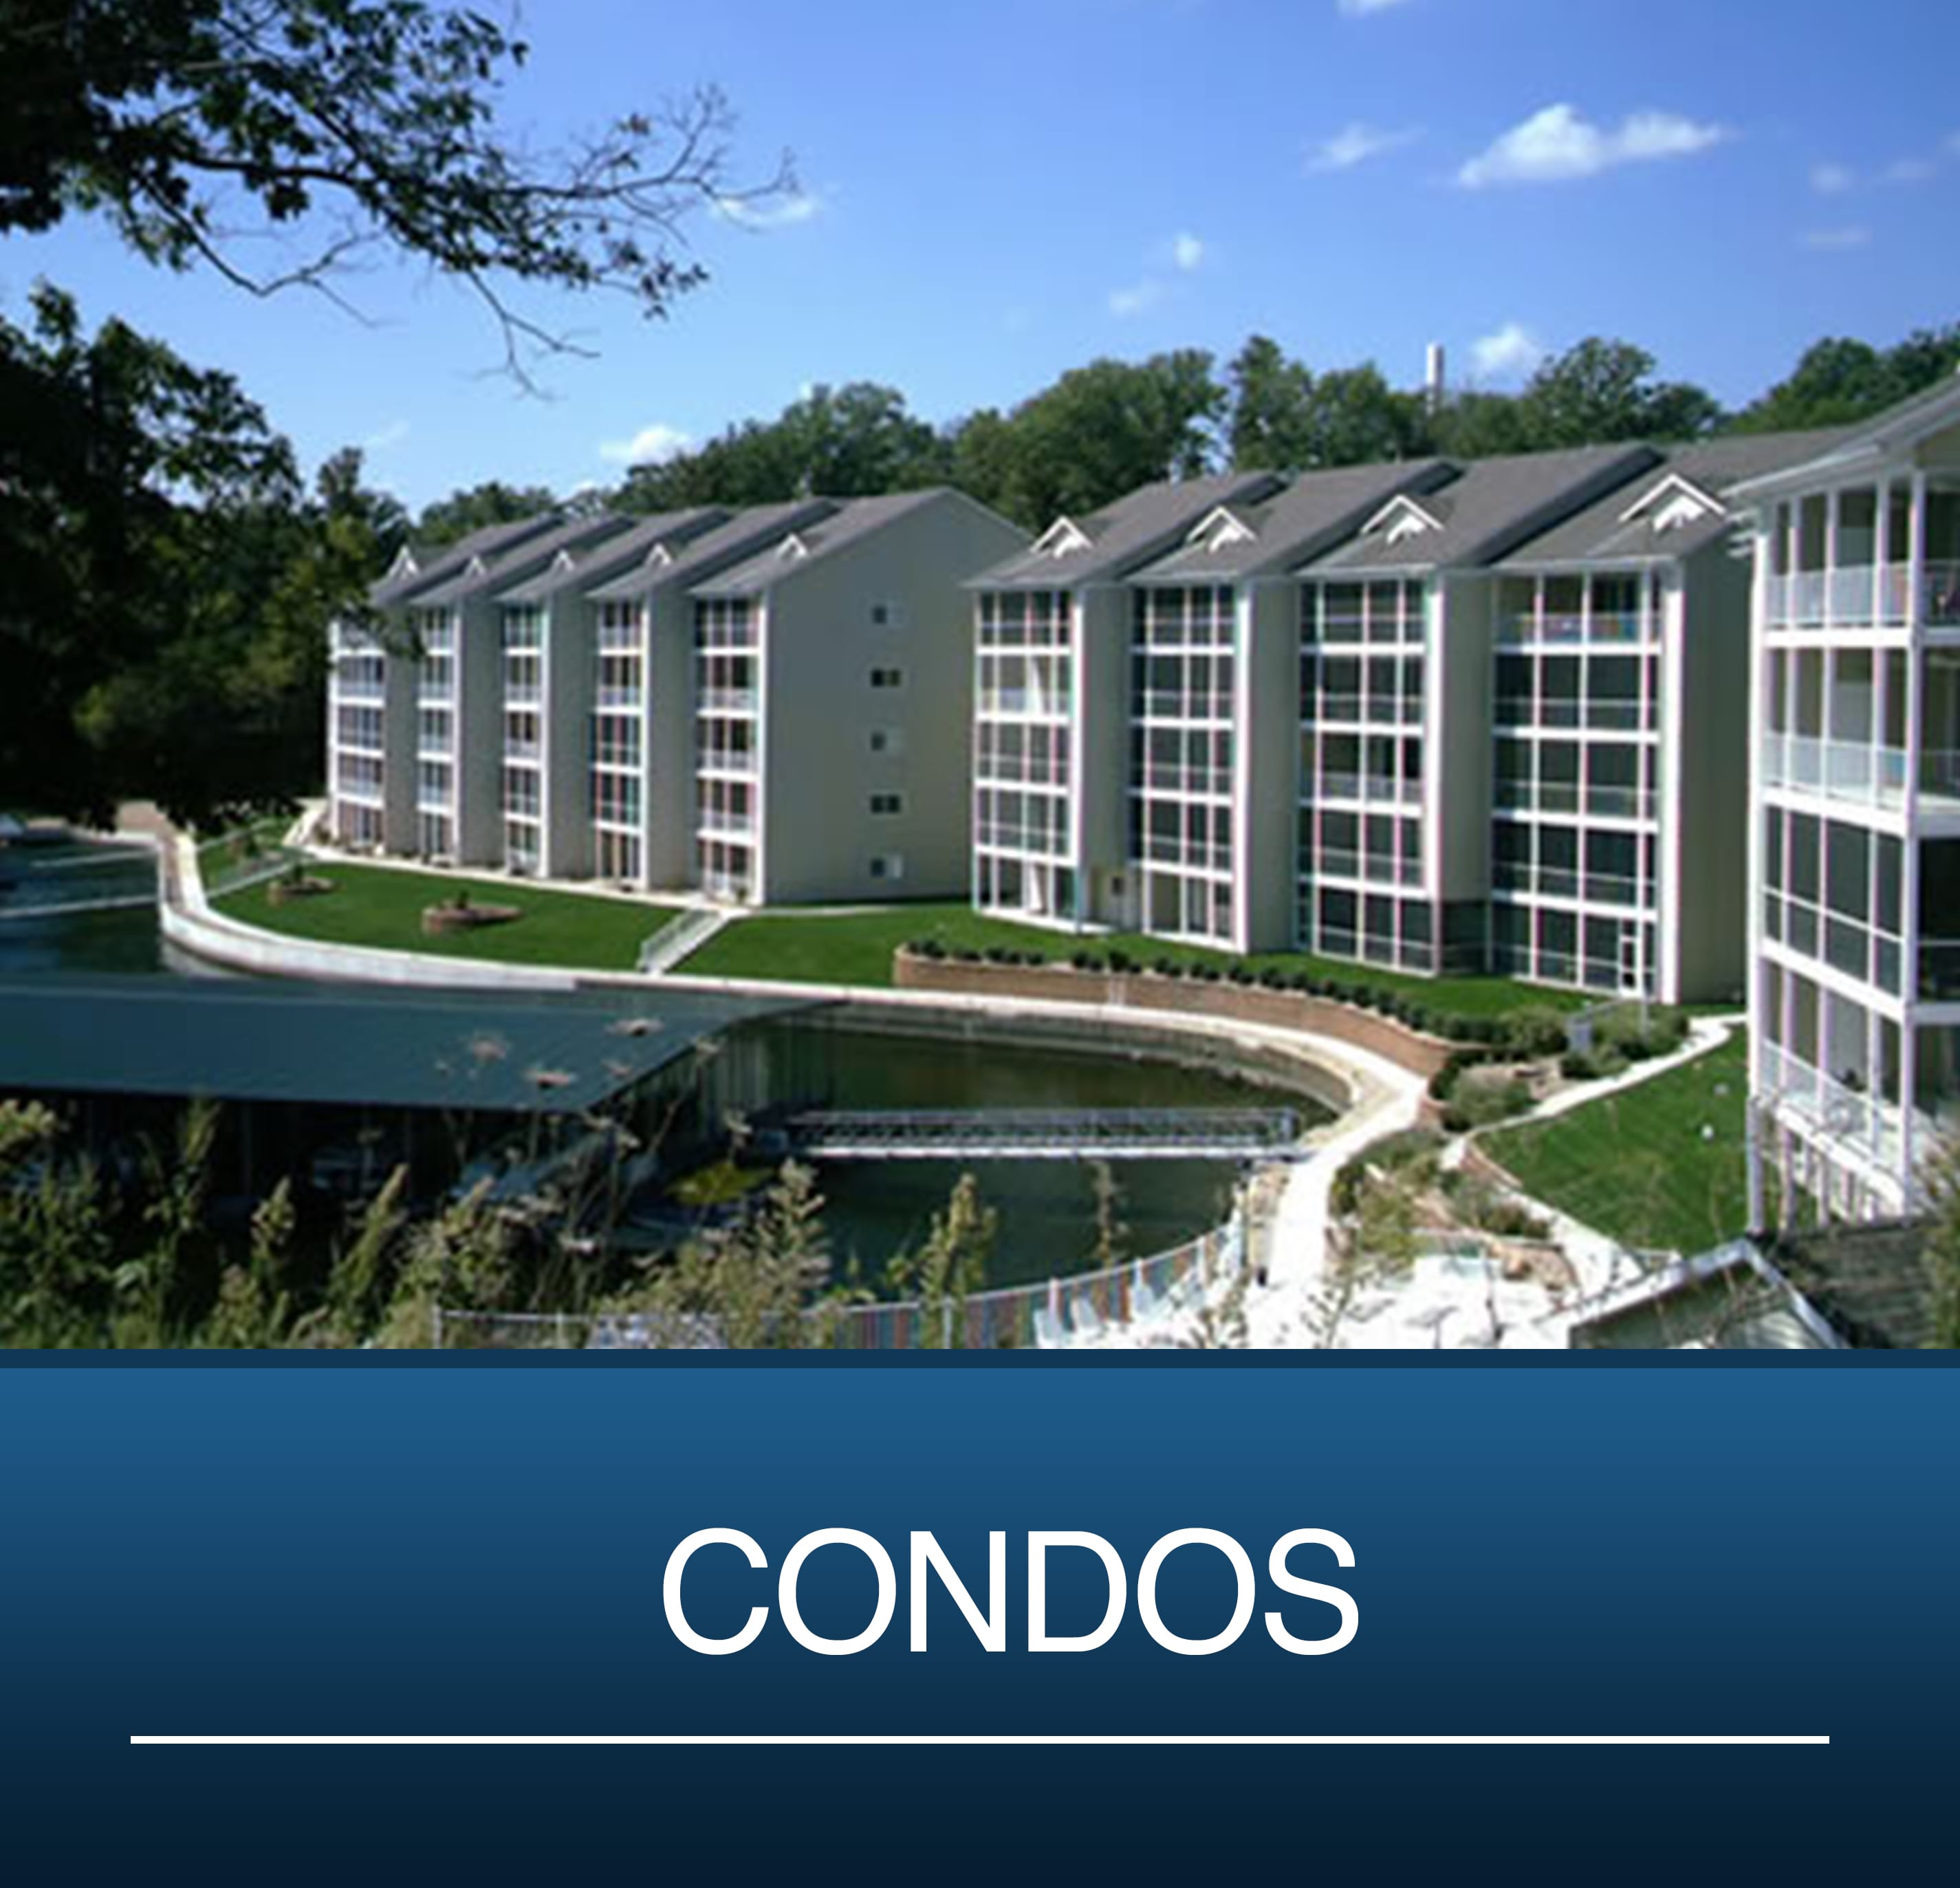 Lake Of The Ozarks Condo Complexes For Sale Jane Kelly Real Estate